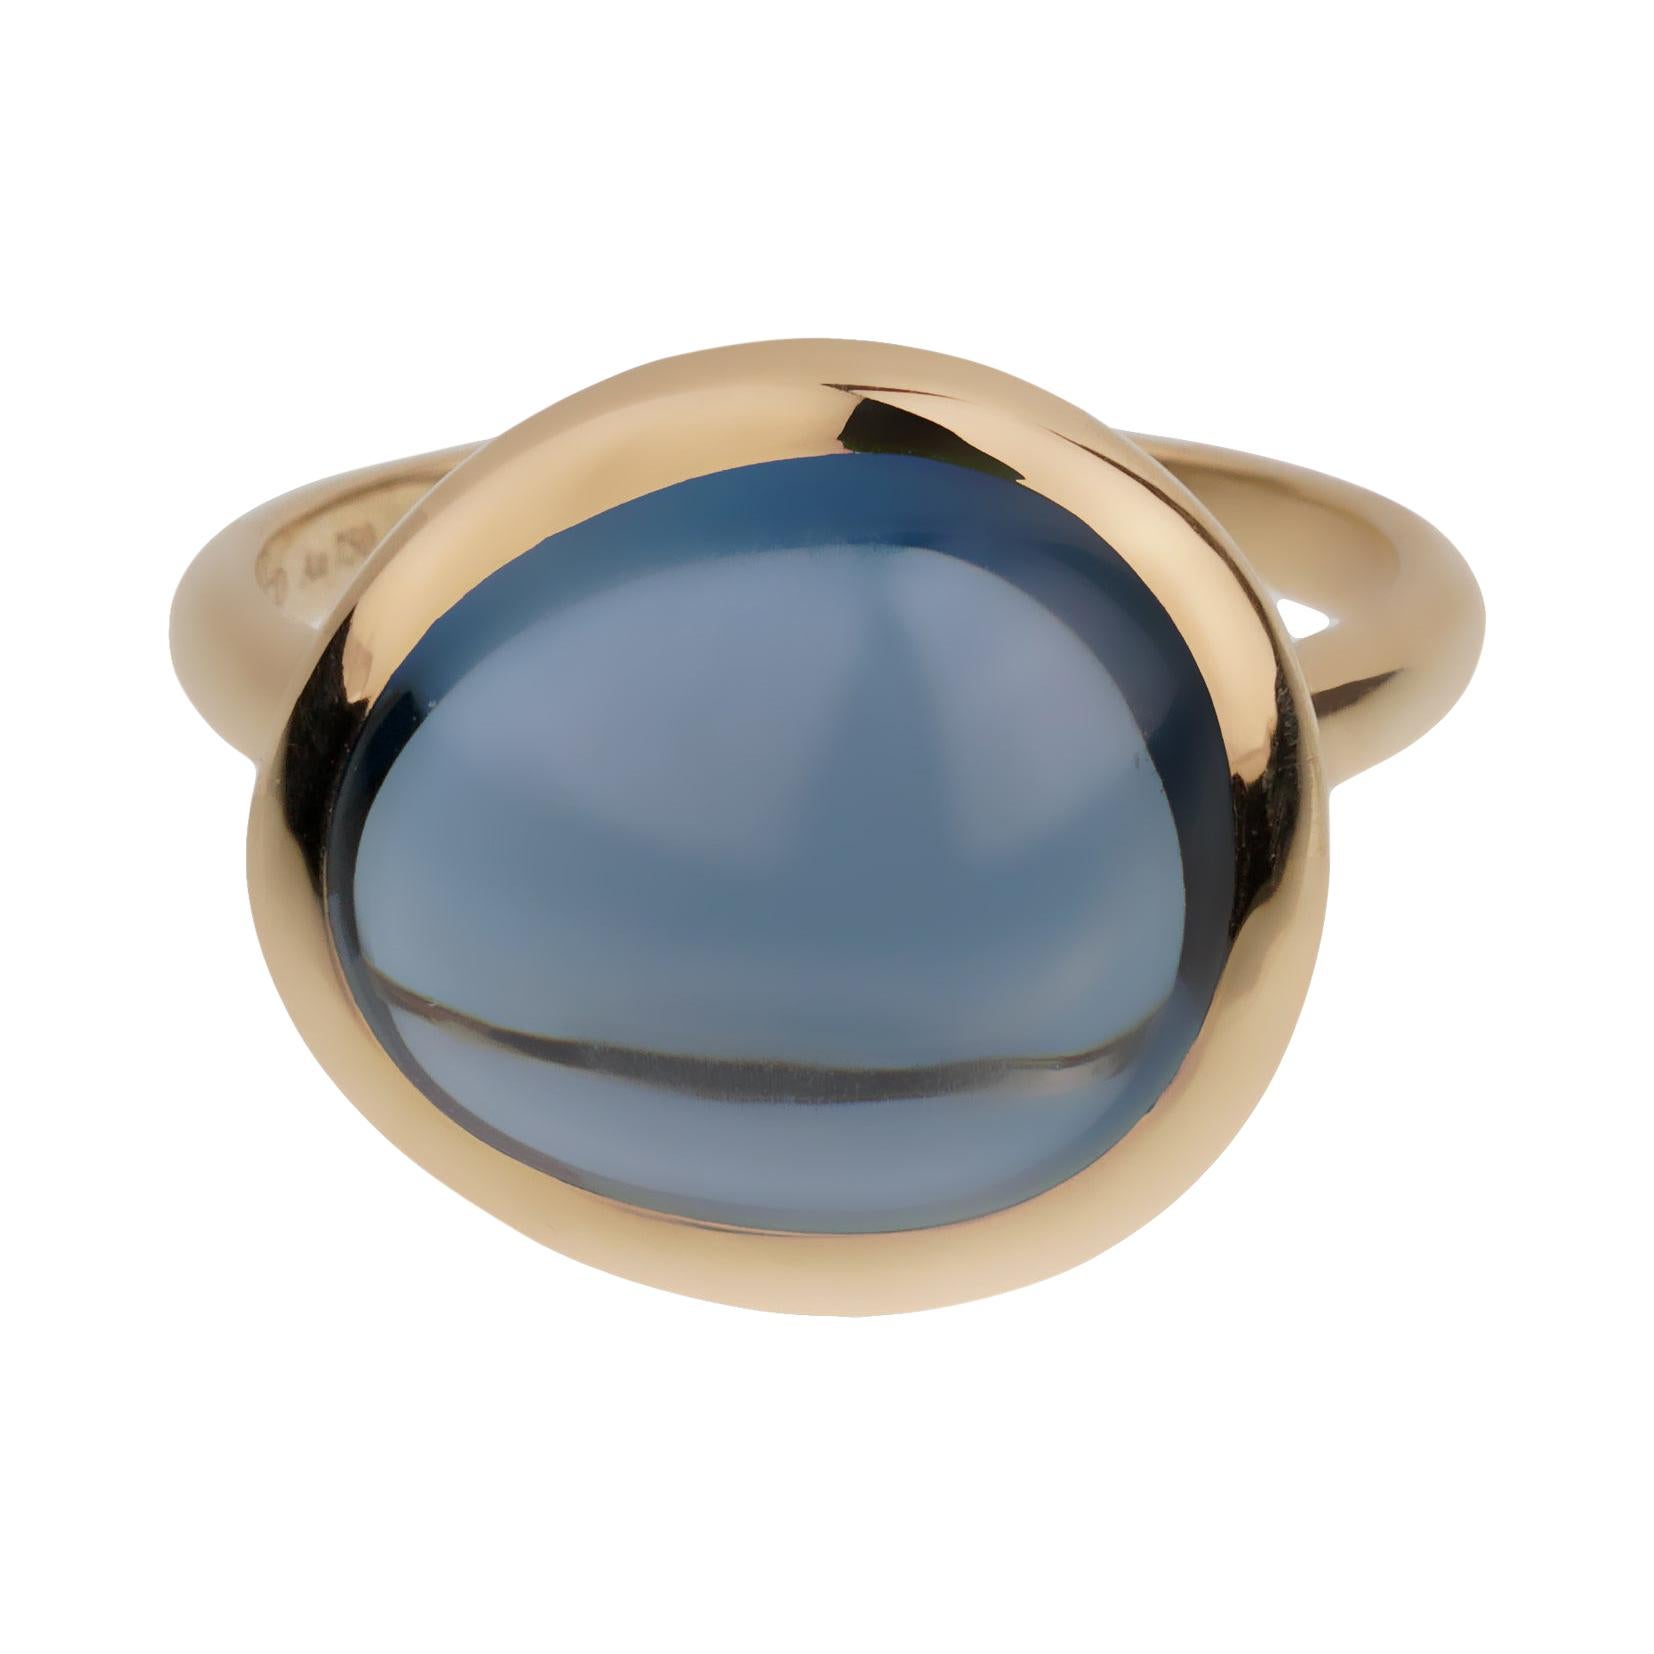 A chic Fred of Paris cocktail ring showcasing a 7ct London Topaz wrapped in 18k yellow gold. The ring measures a size 6 1/2 and can be resized if needed.